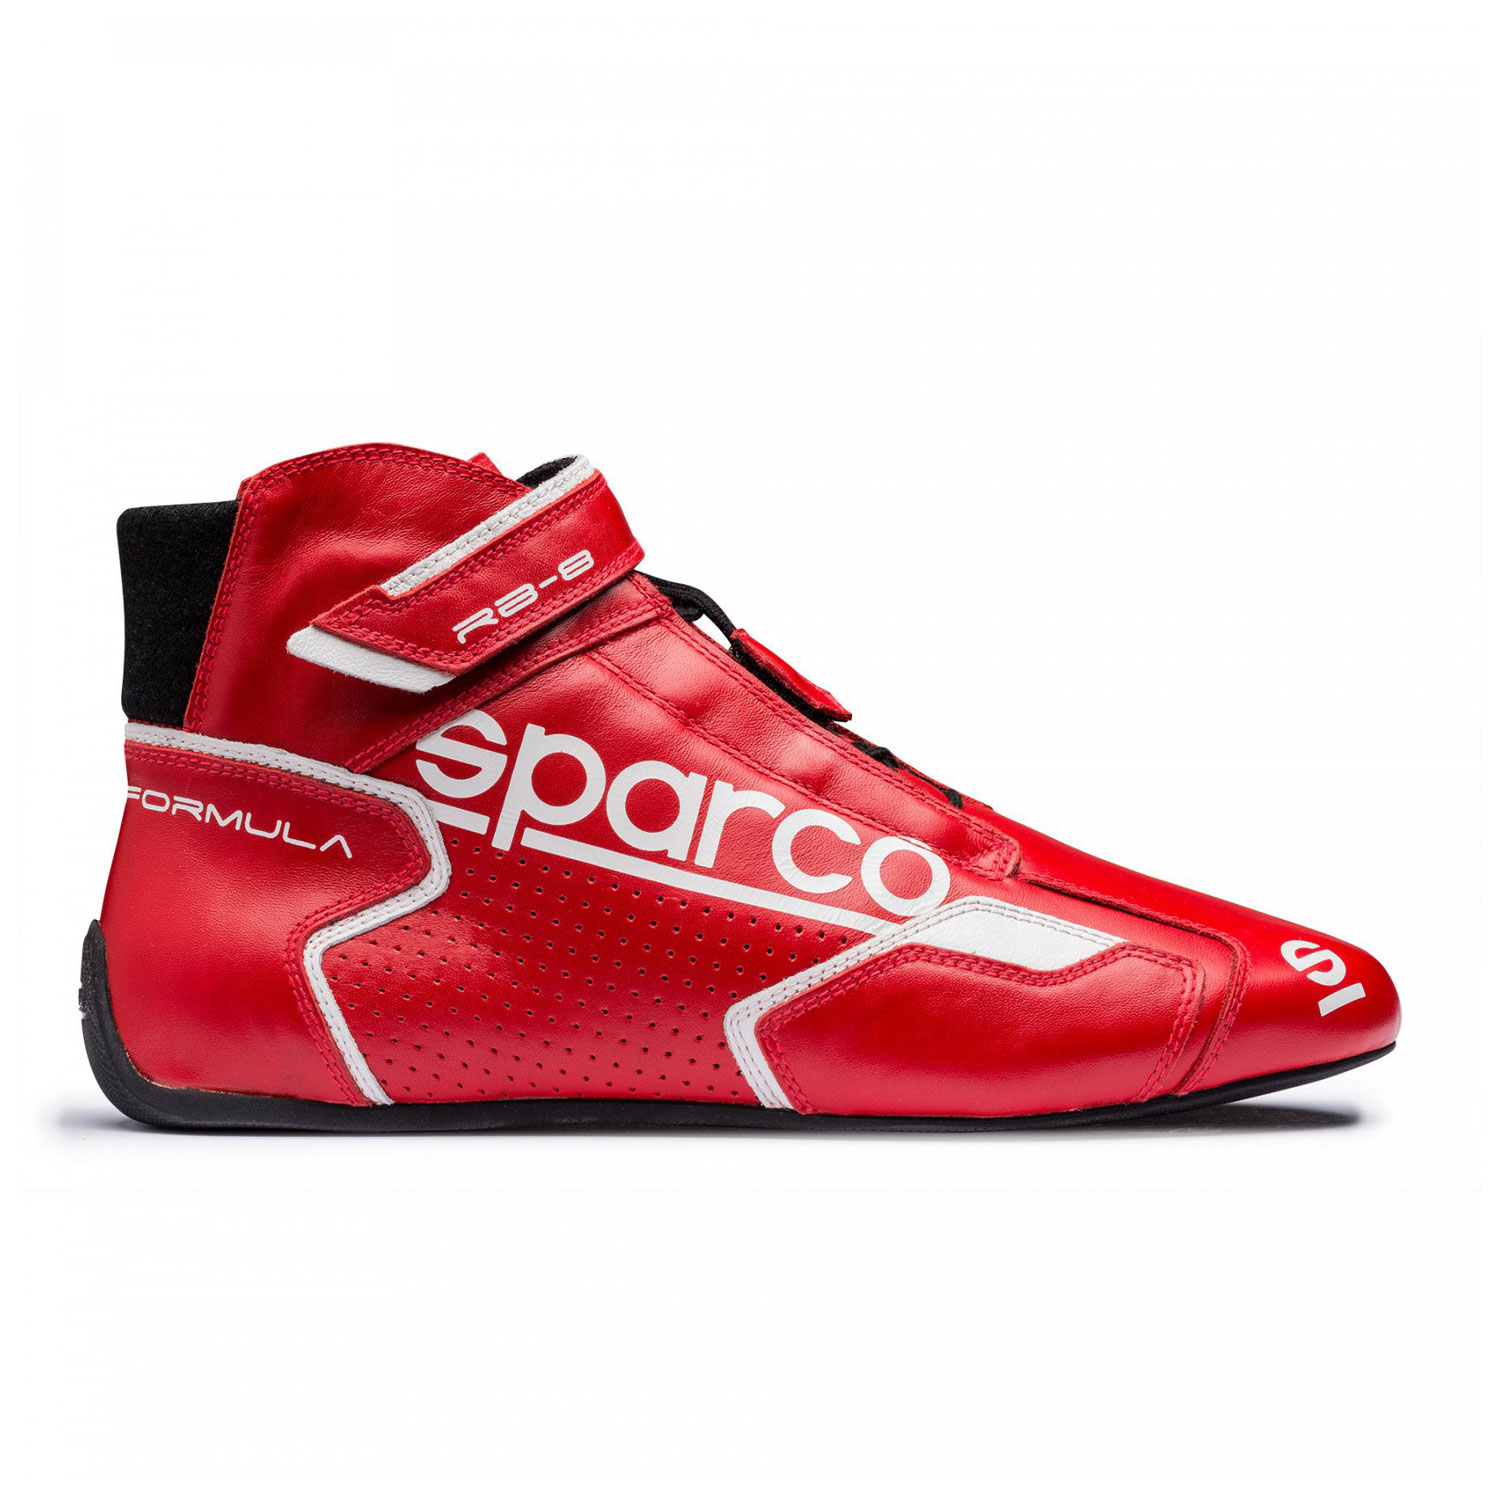 Sparco Italy FORMULA RB-8.1 Racing 